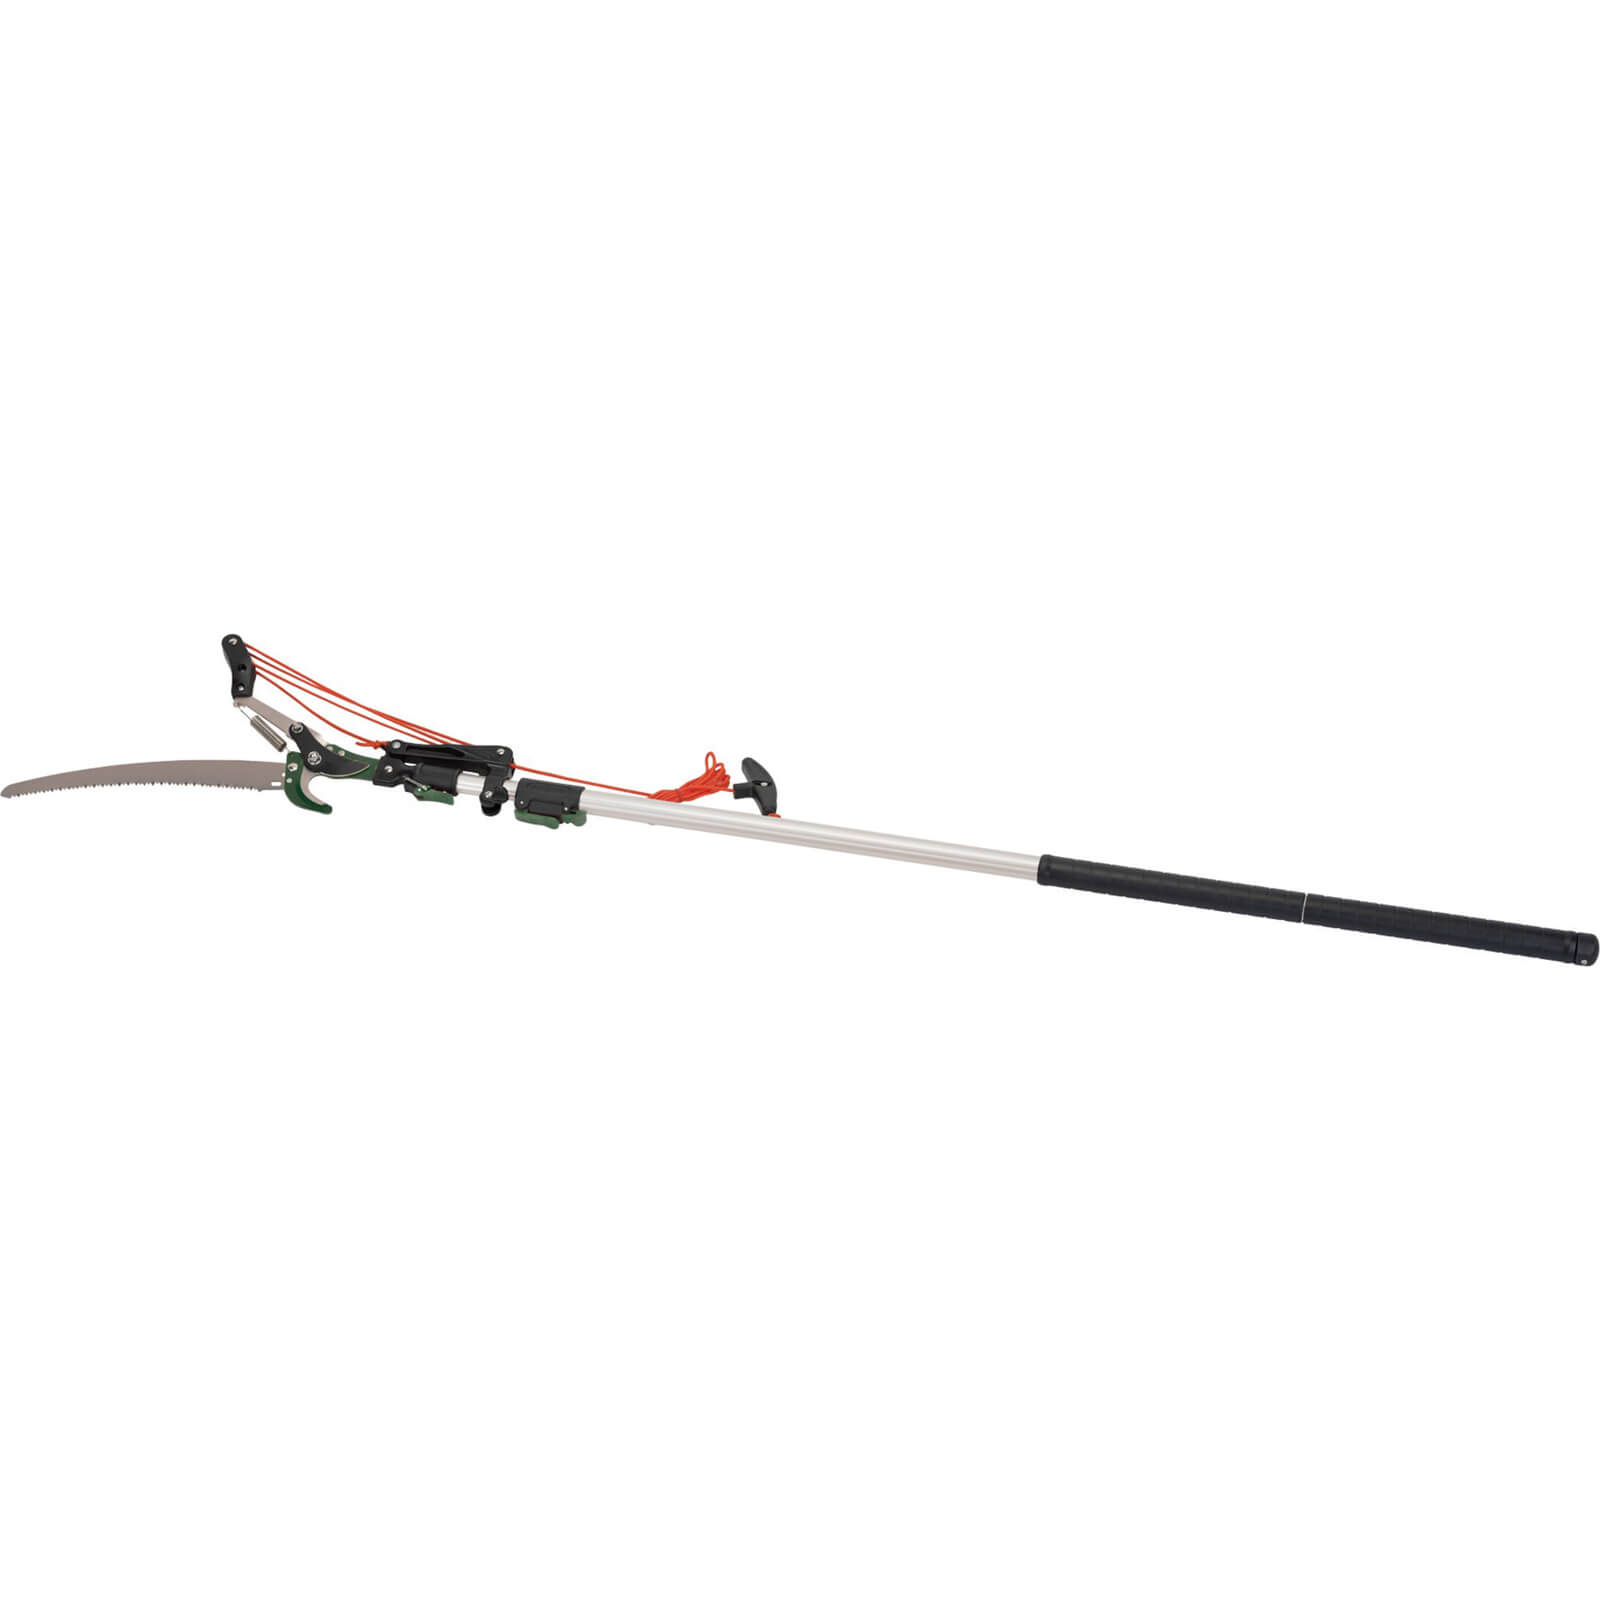 Image of Draper G1200 Expert Telescopic Tree Pruner and Loppers 2.5m